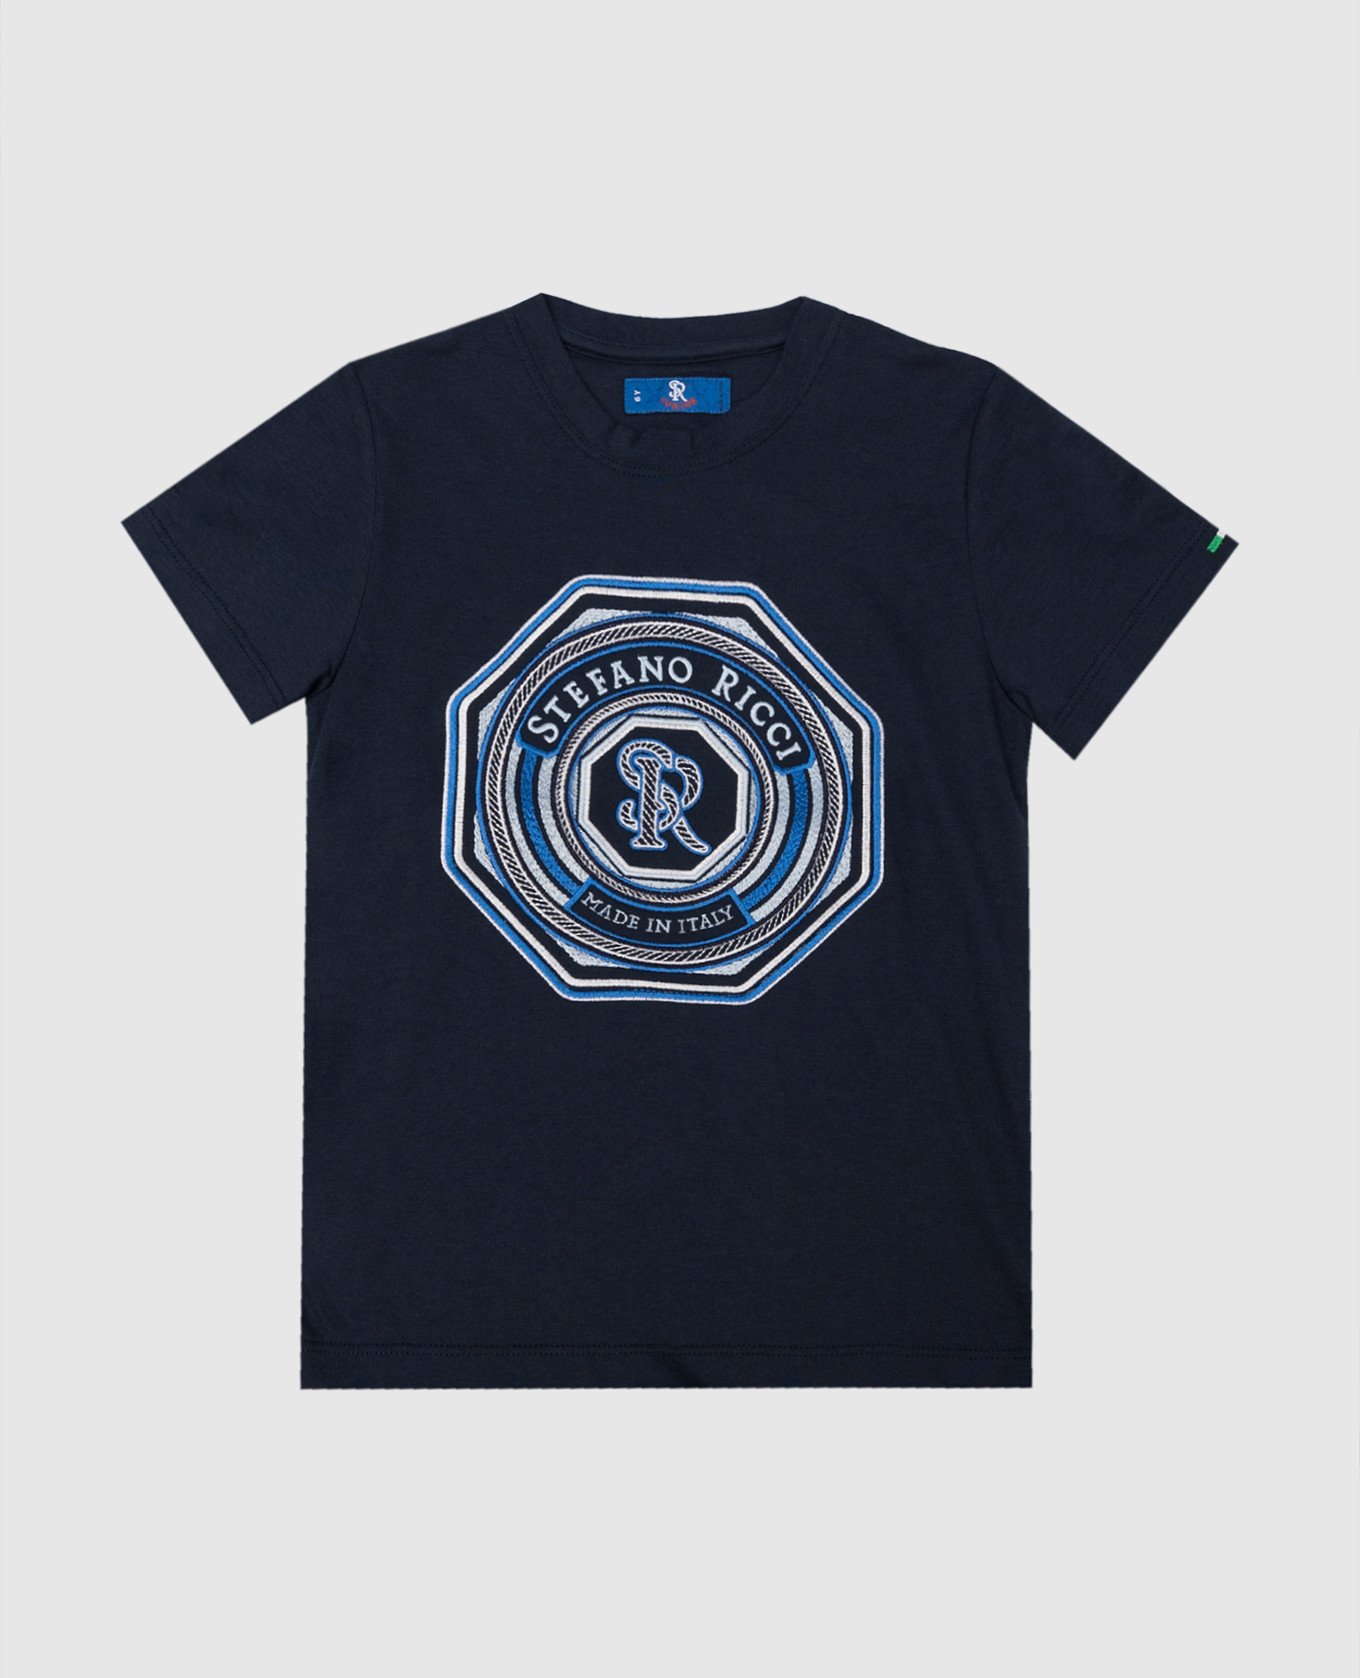 Children's blue t-shirt with logo embroidery